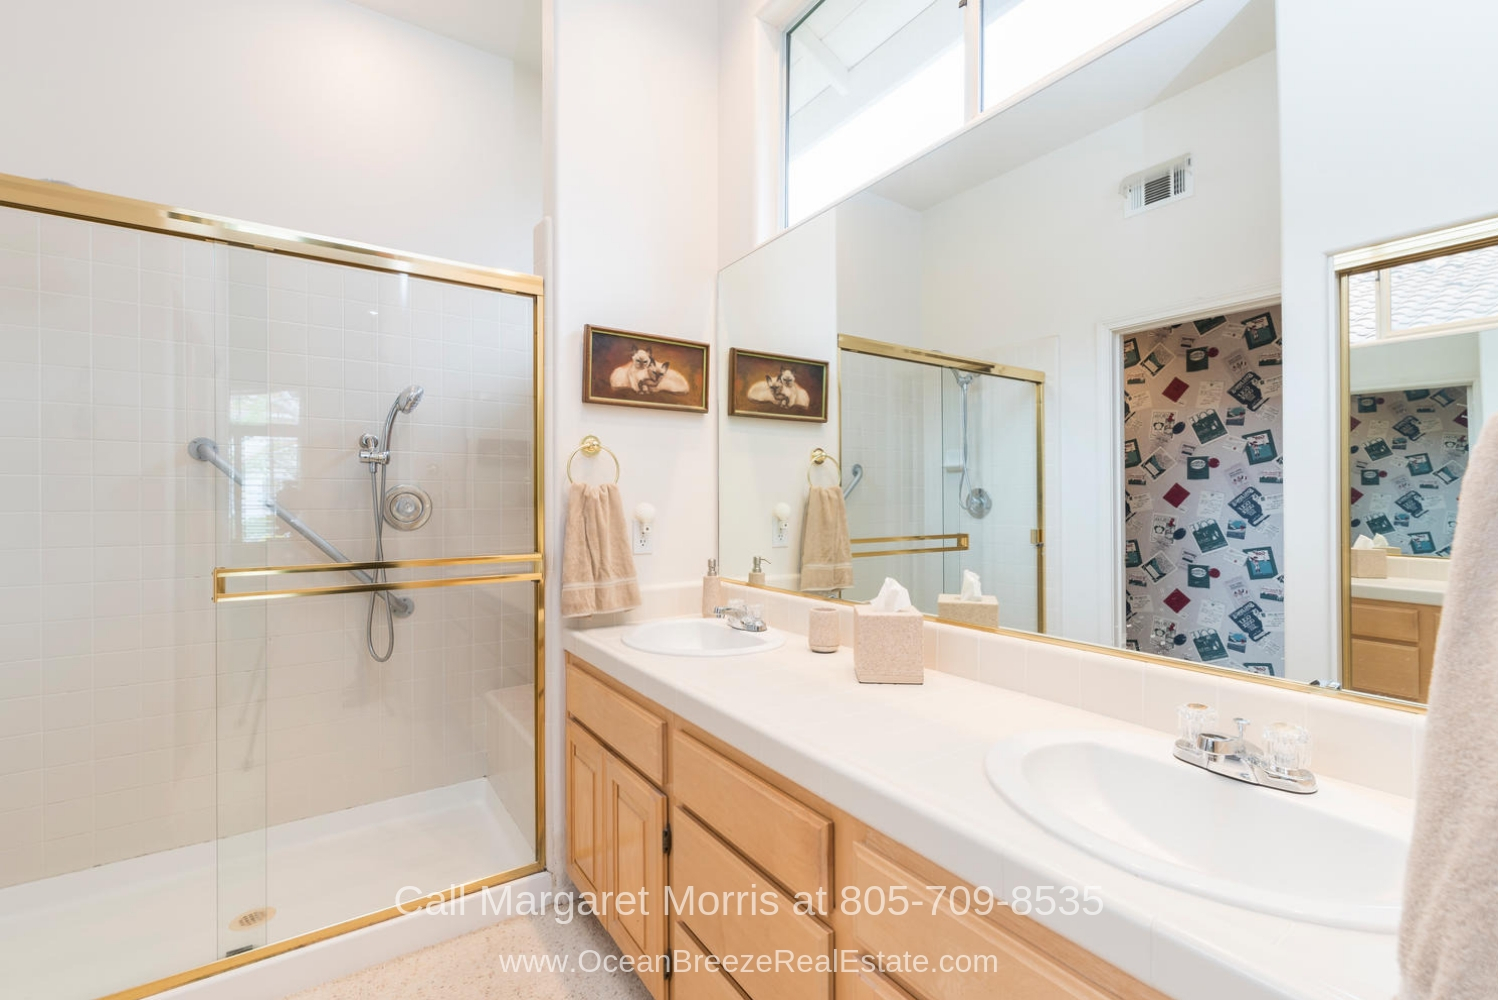 The Fairways Nipomo CA Golf Homes for Sale - Enjoy relaxing baths in the master bathroom of this Nipomo CA golf home for sale. 